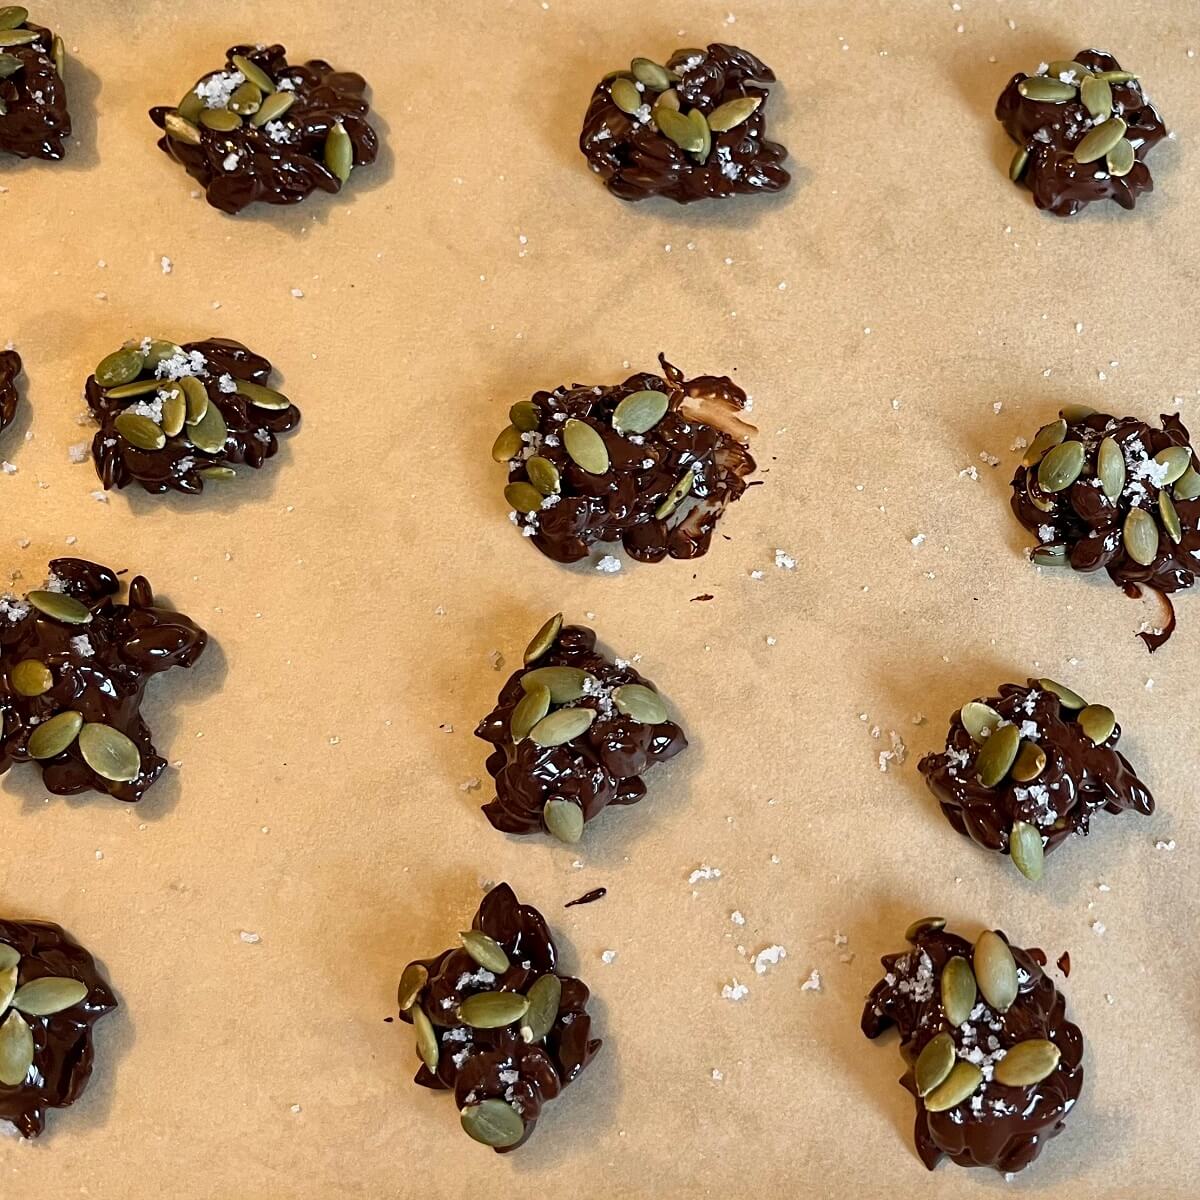 Pumpkin seed clusters on a sheet pan lined with parchment paper.